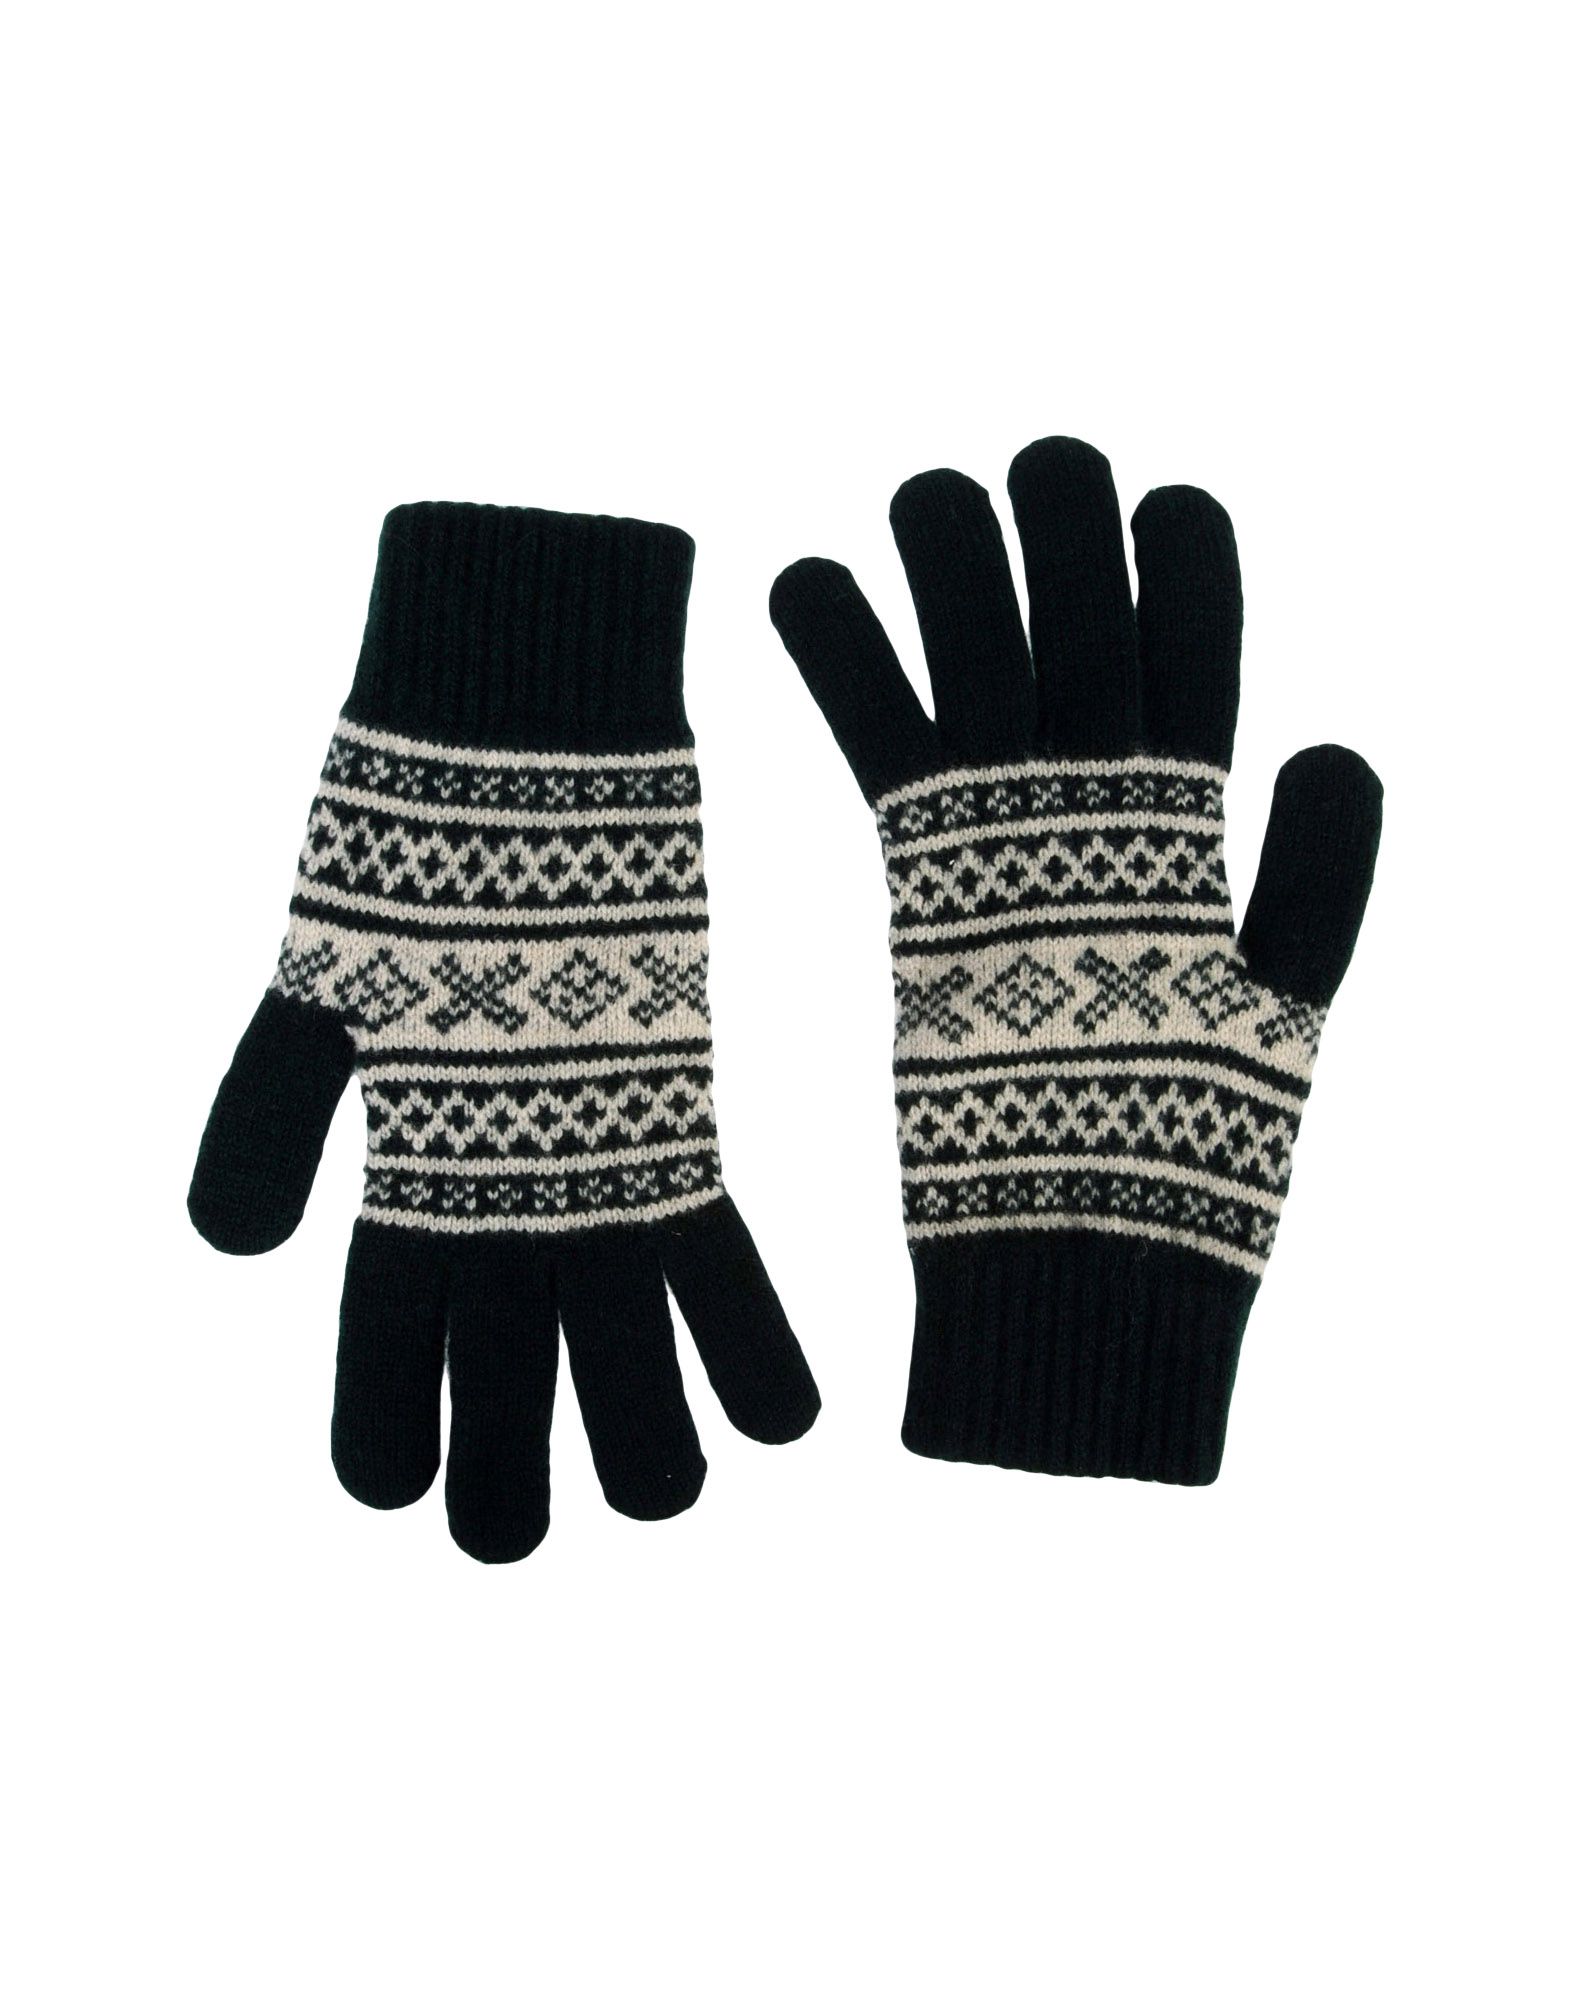 Foto Ymc You Must Create Guantes Mujer Verde oscuro foto 648160